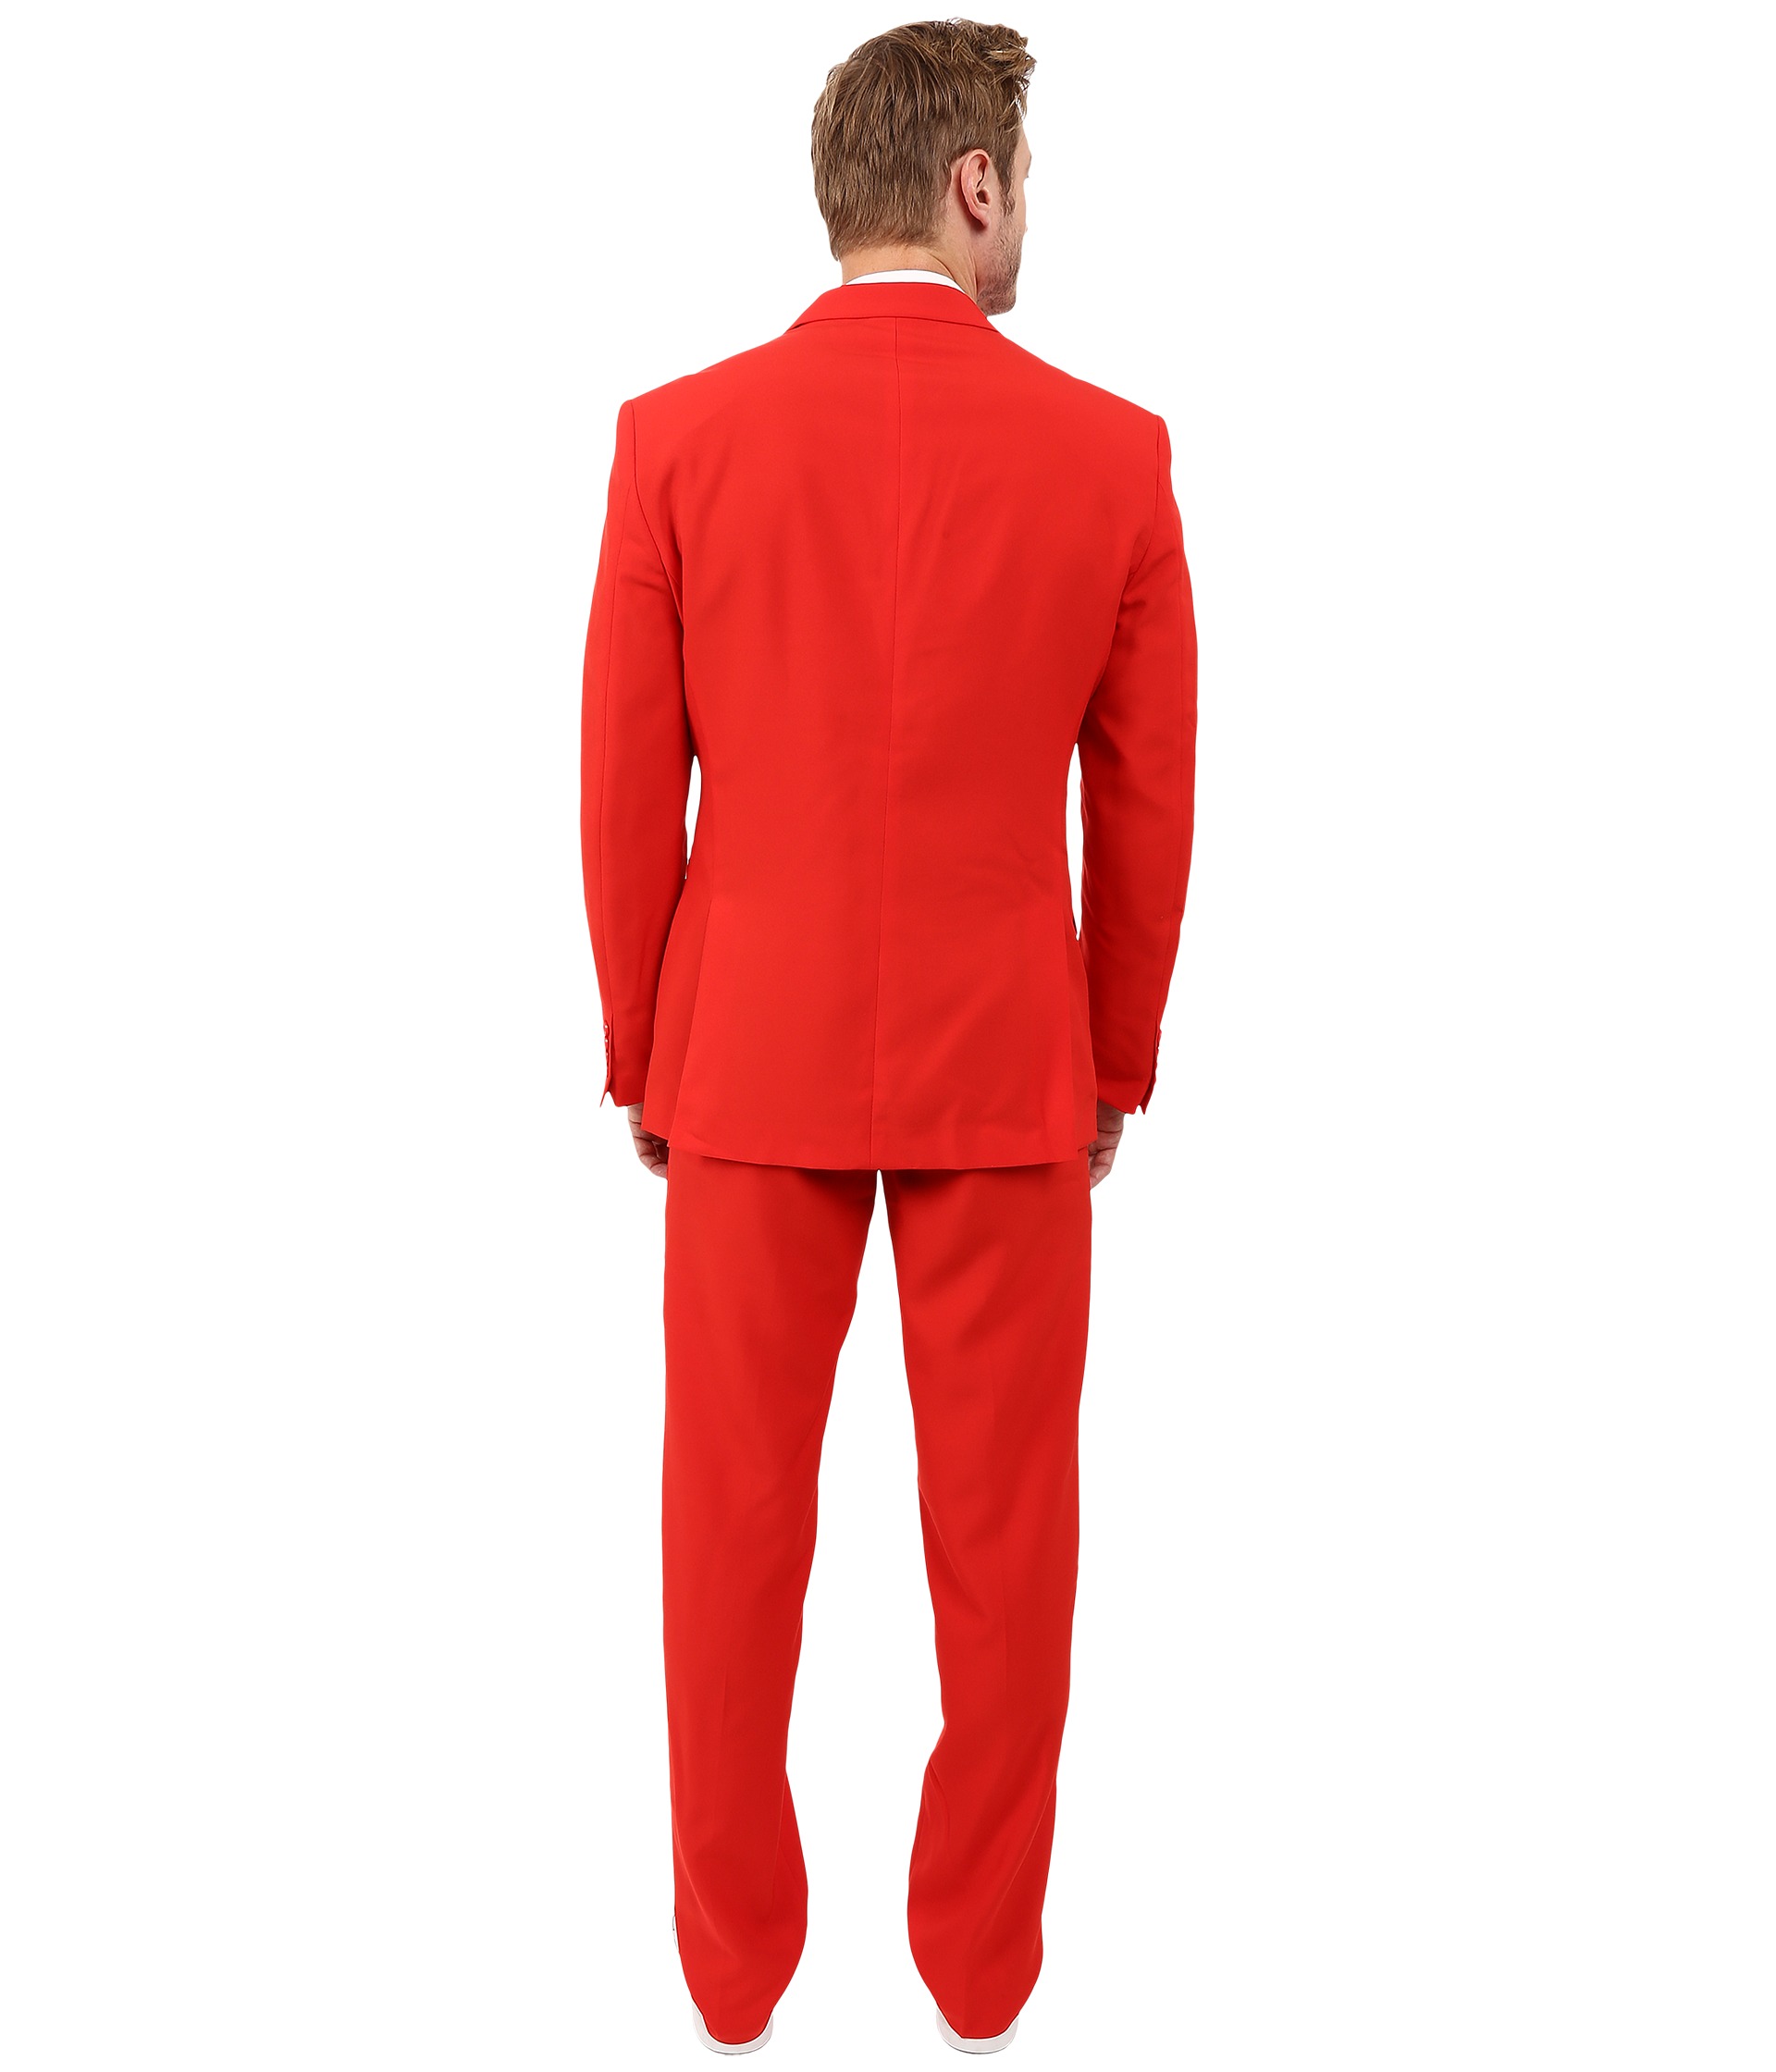 OppoSuits Red Devil Suit Medium Red - Zappos.com Free Shipping BOTH Ways